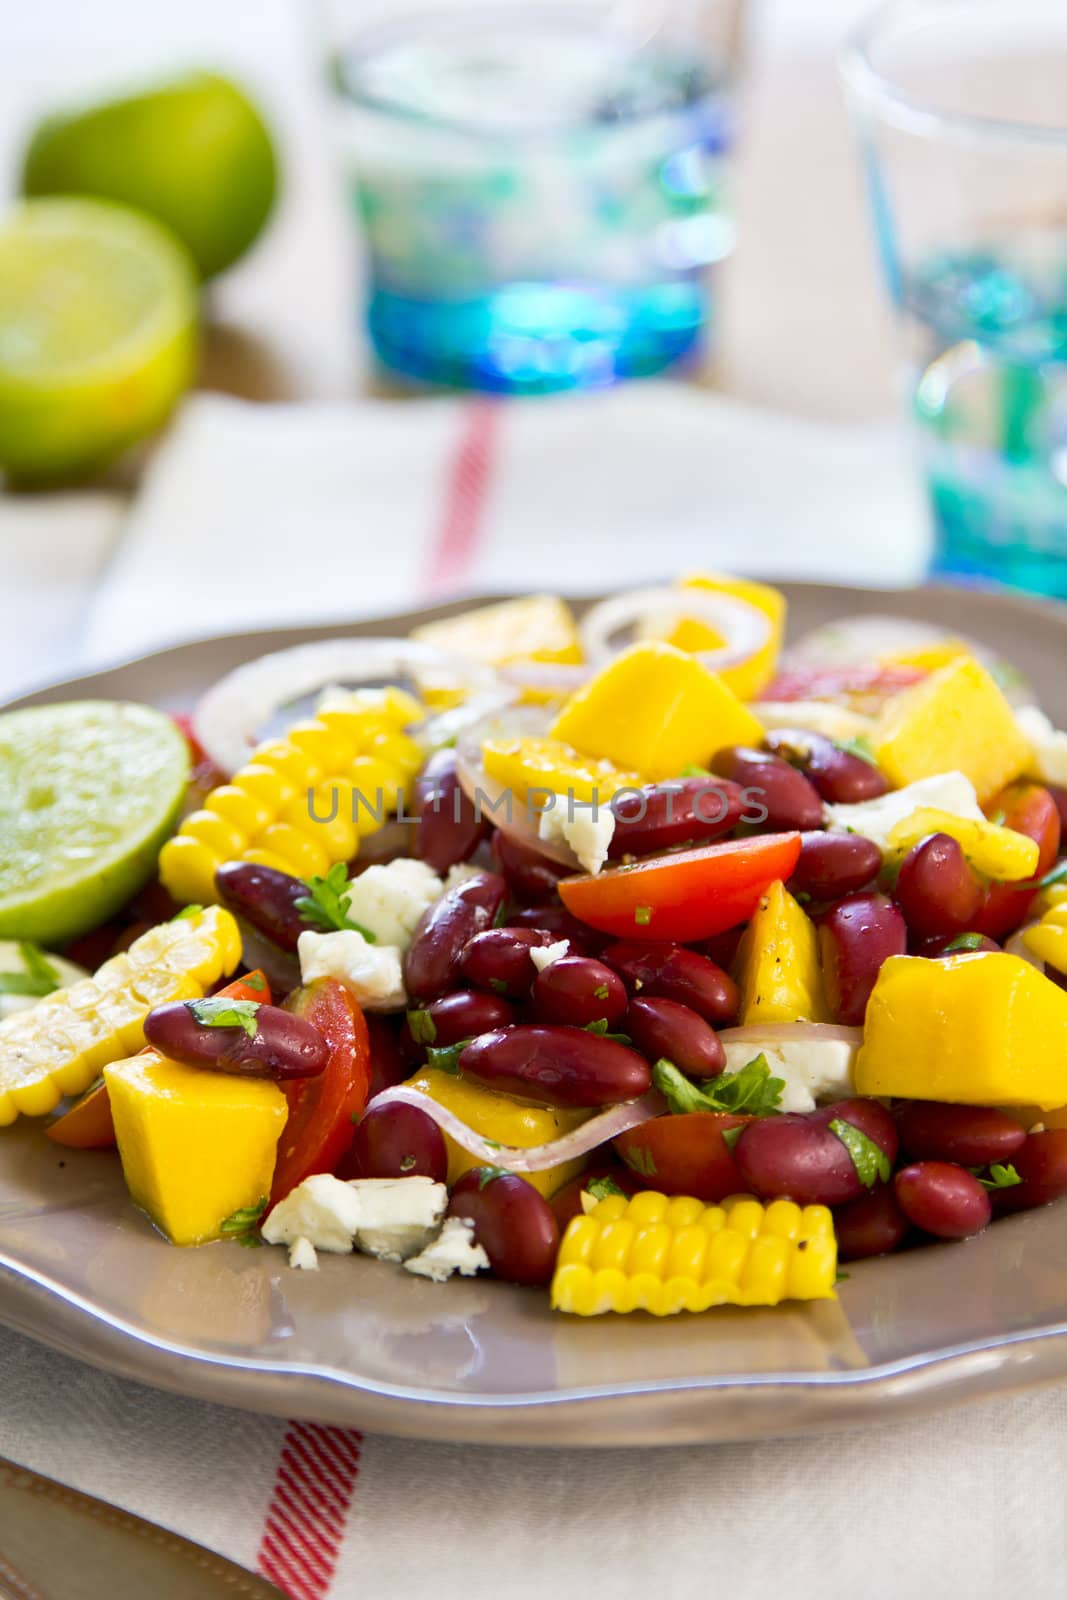 Kidney Beans with  Mango,Sweetcorn and Feta cheese salad